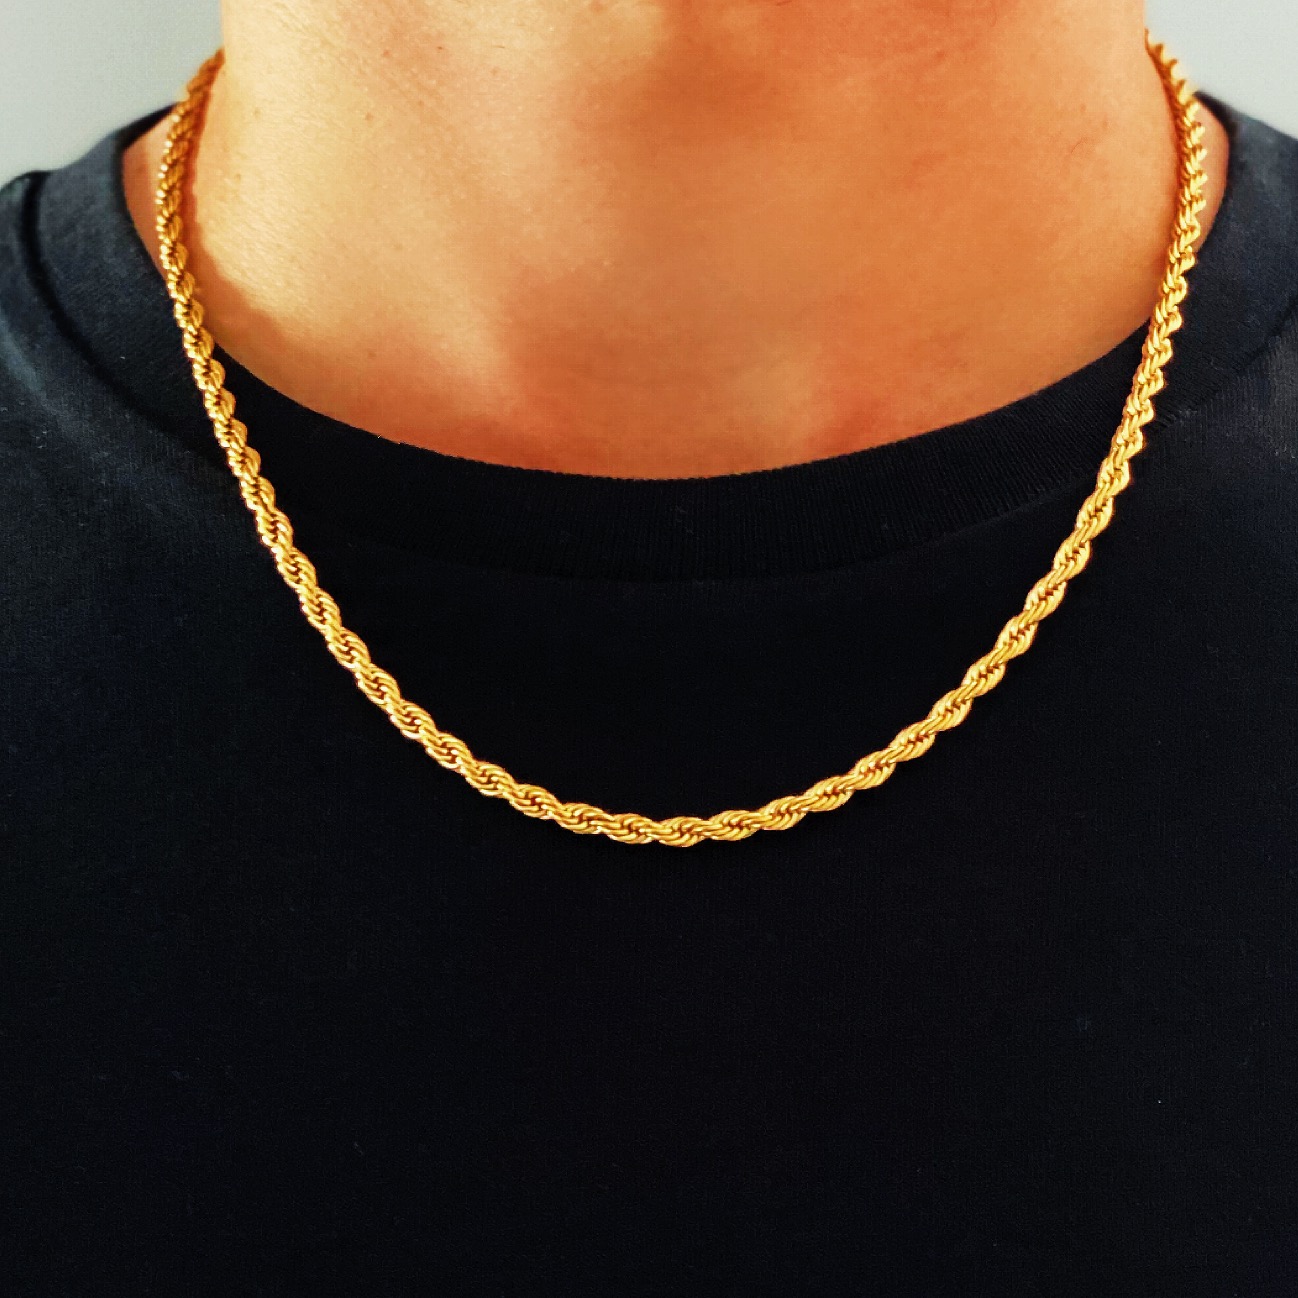 Real Gold Rope Chain Online Sale, Save 56% | jlcatj.gob.mx